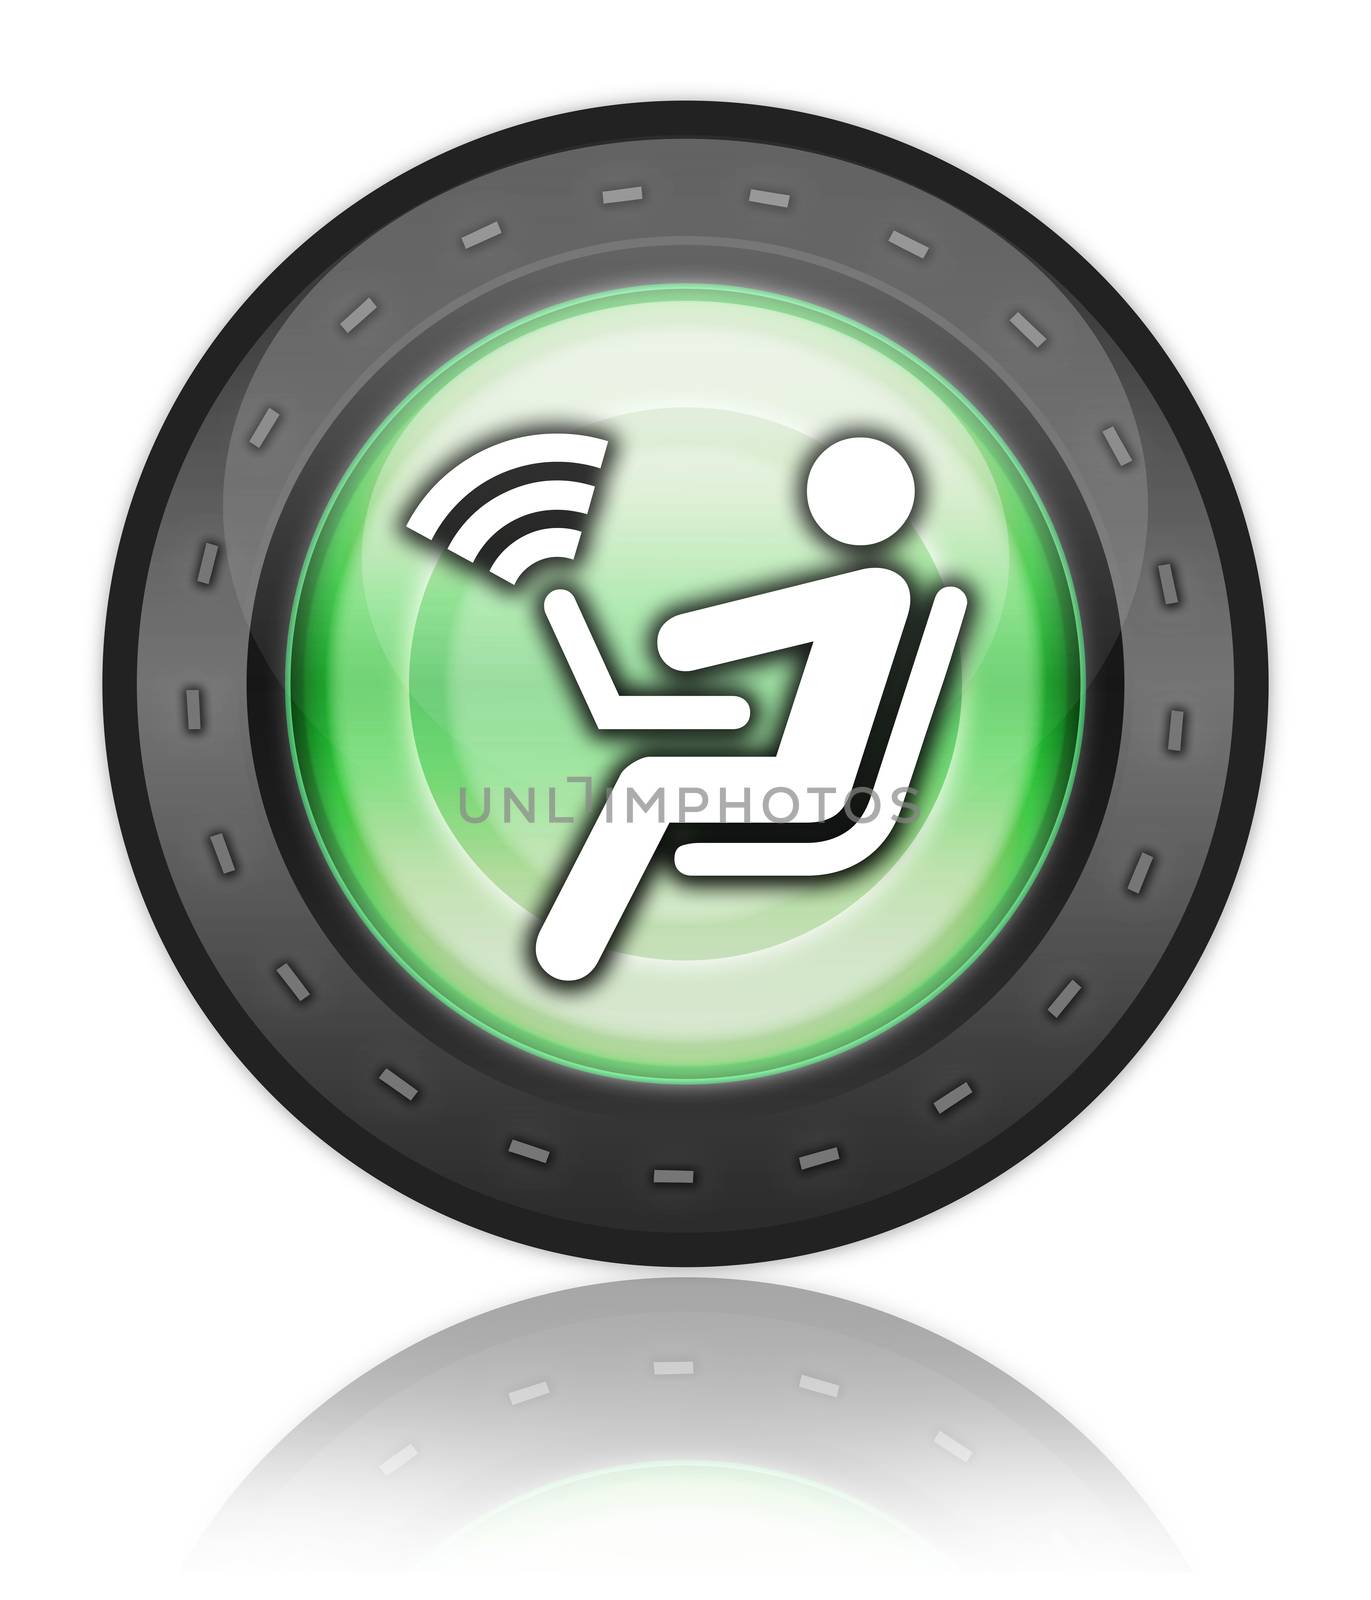 Icon, Button, Pictogram with Wireless Access symbol